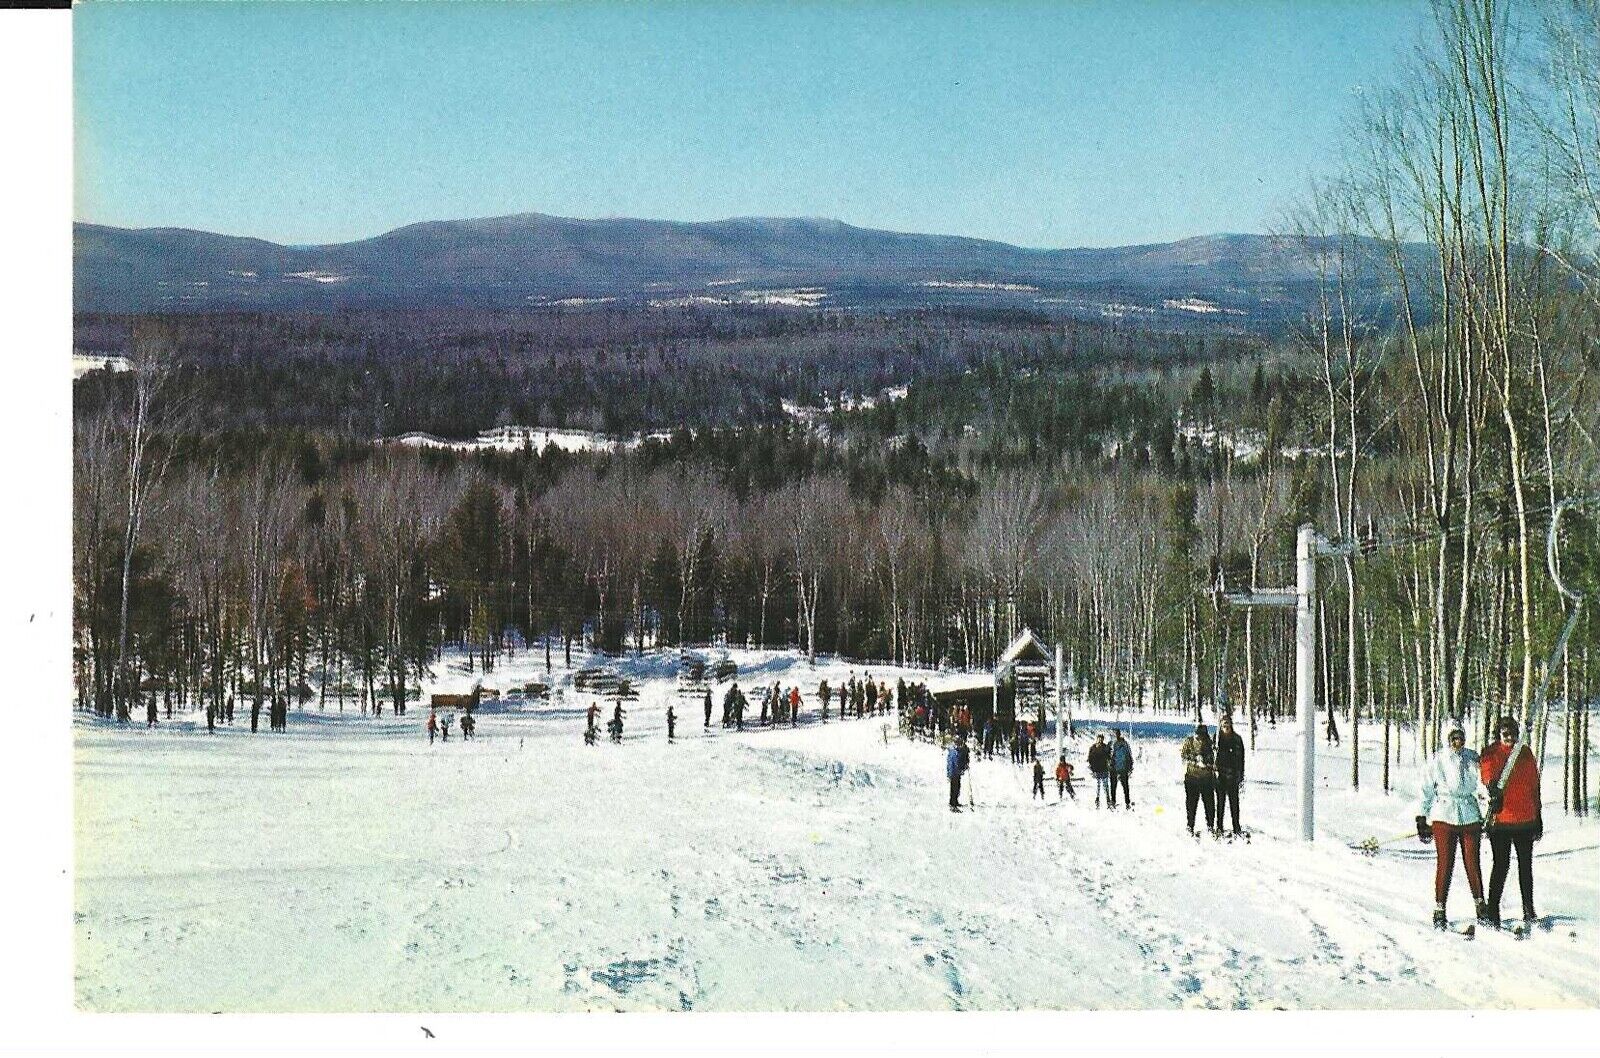  POSTCARD SKIERS ON THE T-BAR LIFT MAGIC MOUNTAIN LONDONDERRY VERMONT